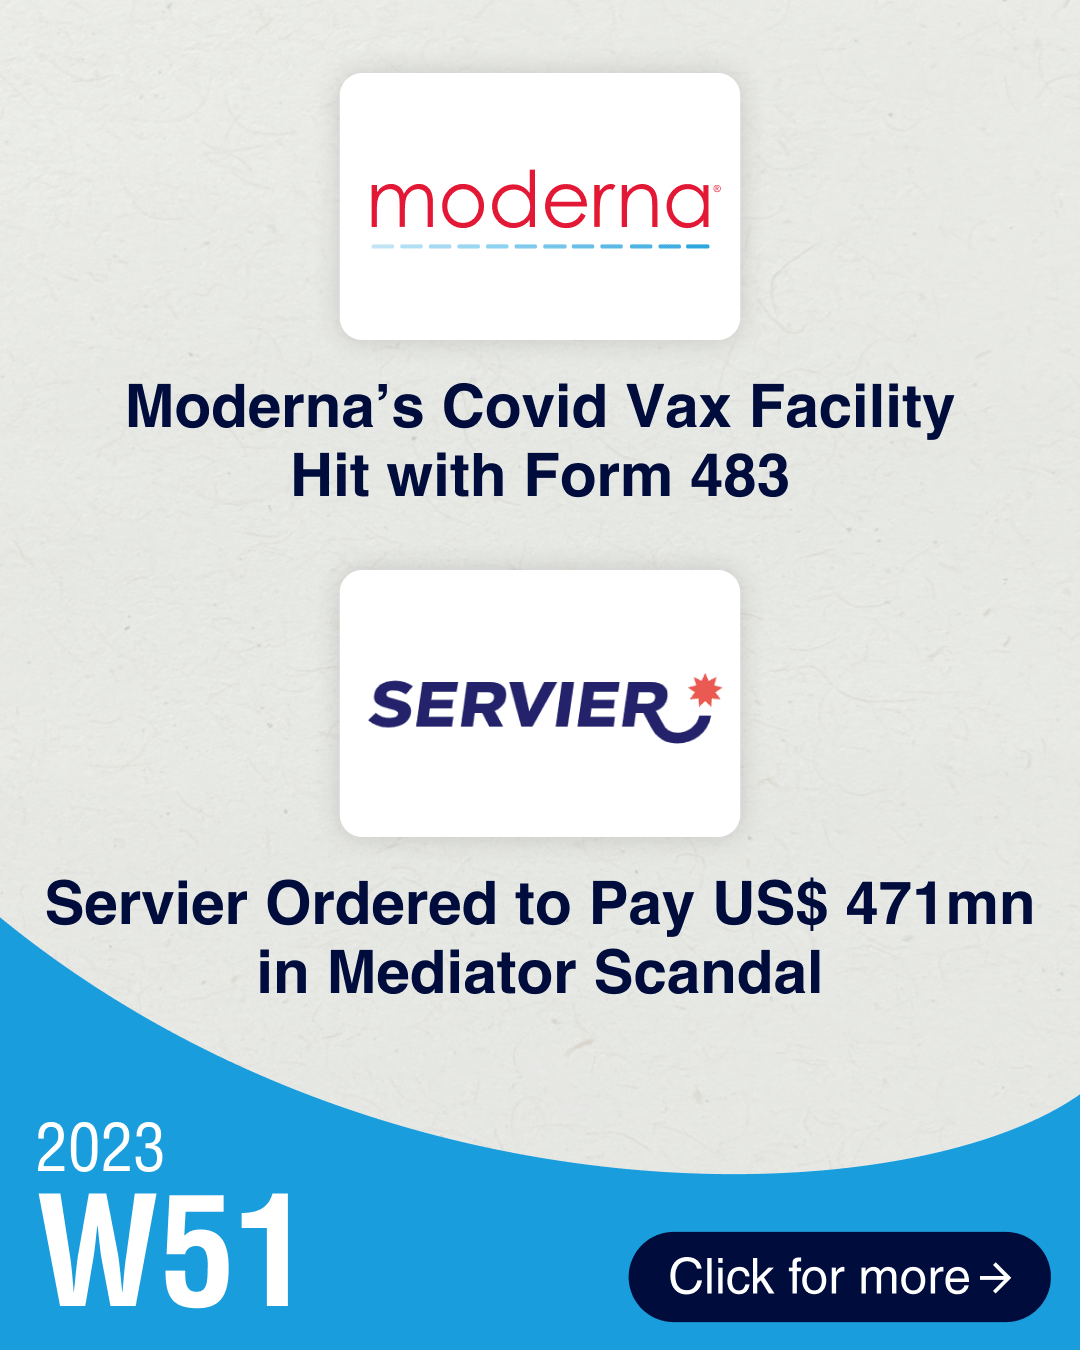 FDA finds major lapses at Moderna’s Covid vax facility, Servier ordered to pay millions in deadly Mediator scandal